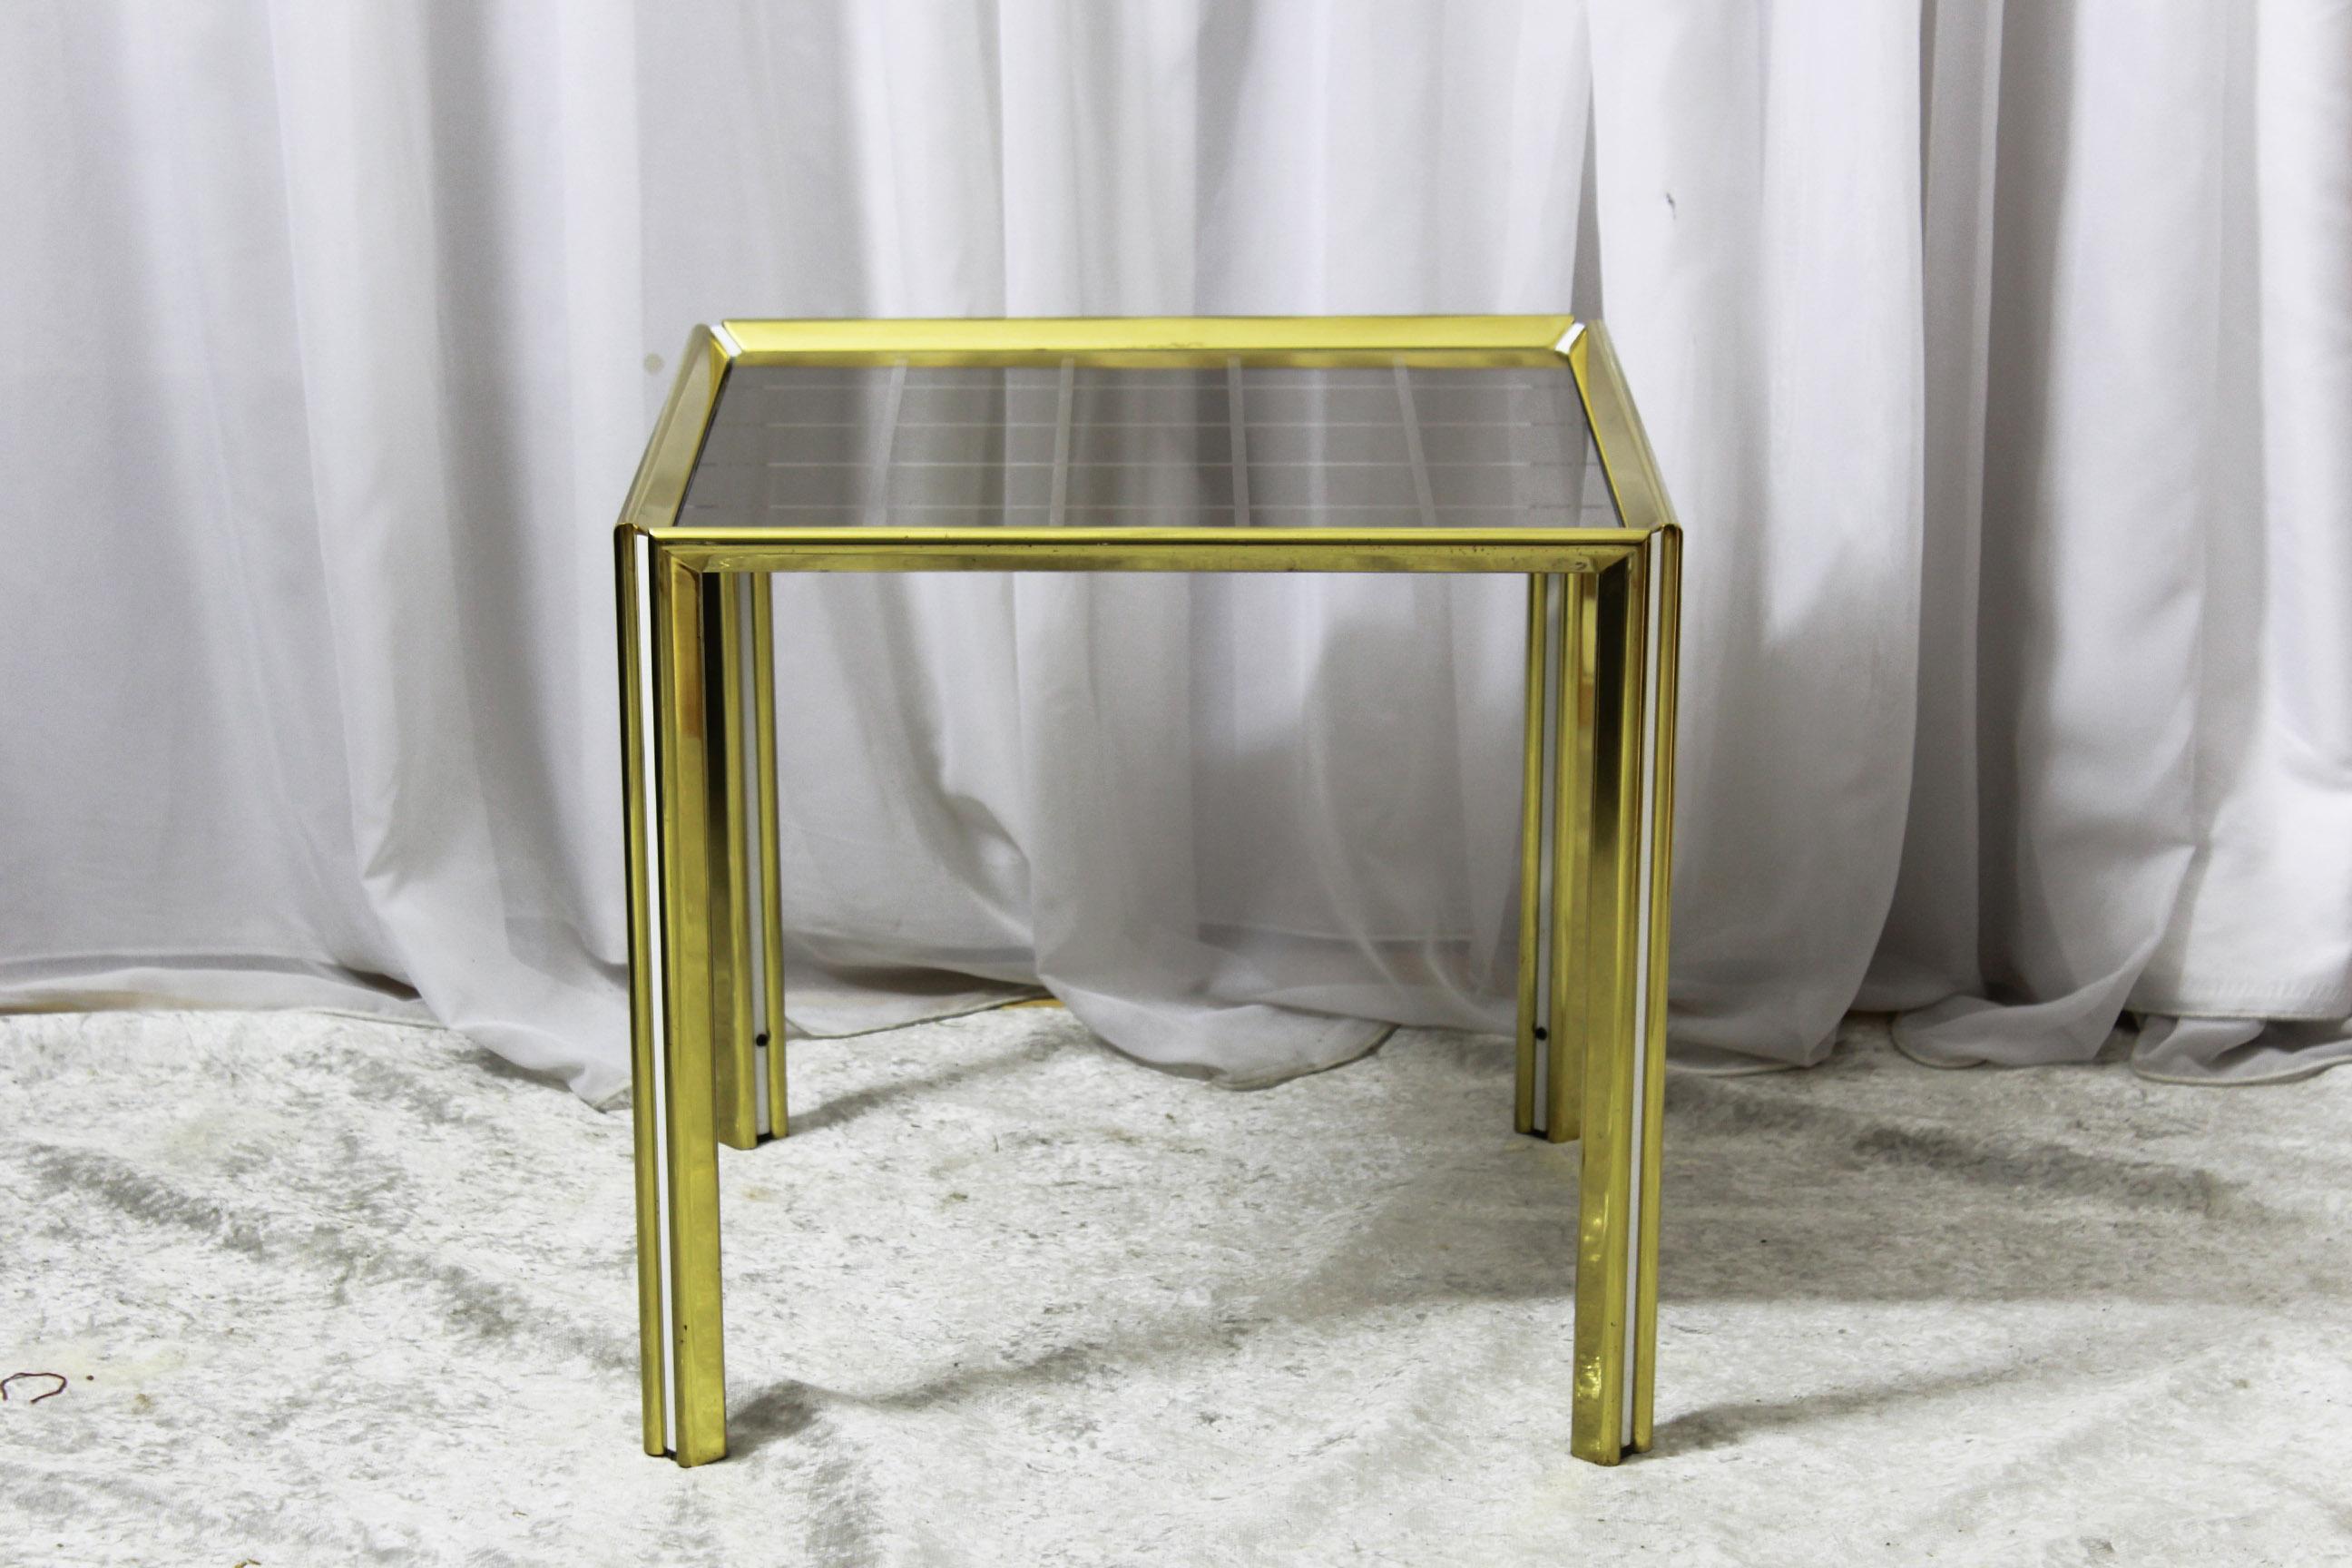 Made in Italy vintage coffee table from the 1970s. Golden iron structure with refined and geometric decoration on the top.
In very good conditions with only few signs of time on goldenrod structure. Glass top is intact. 